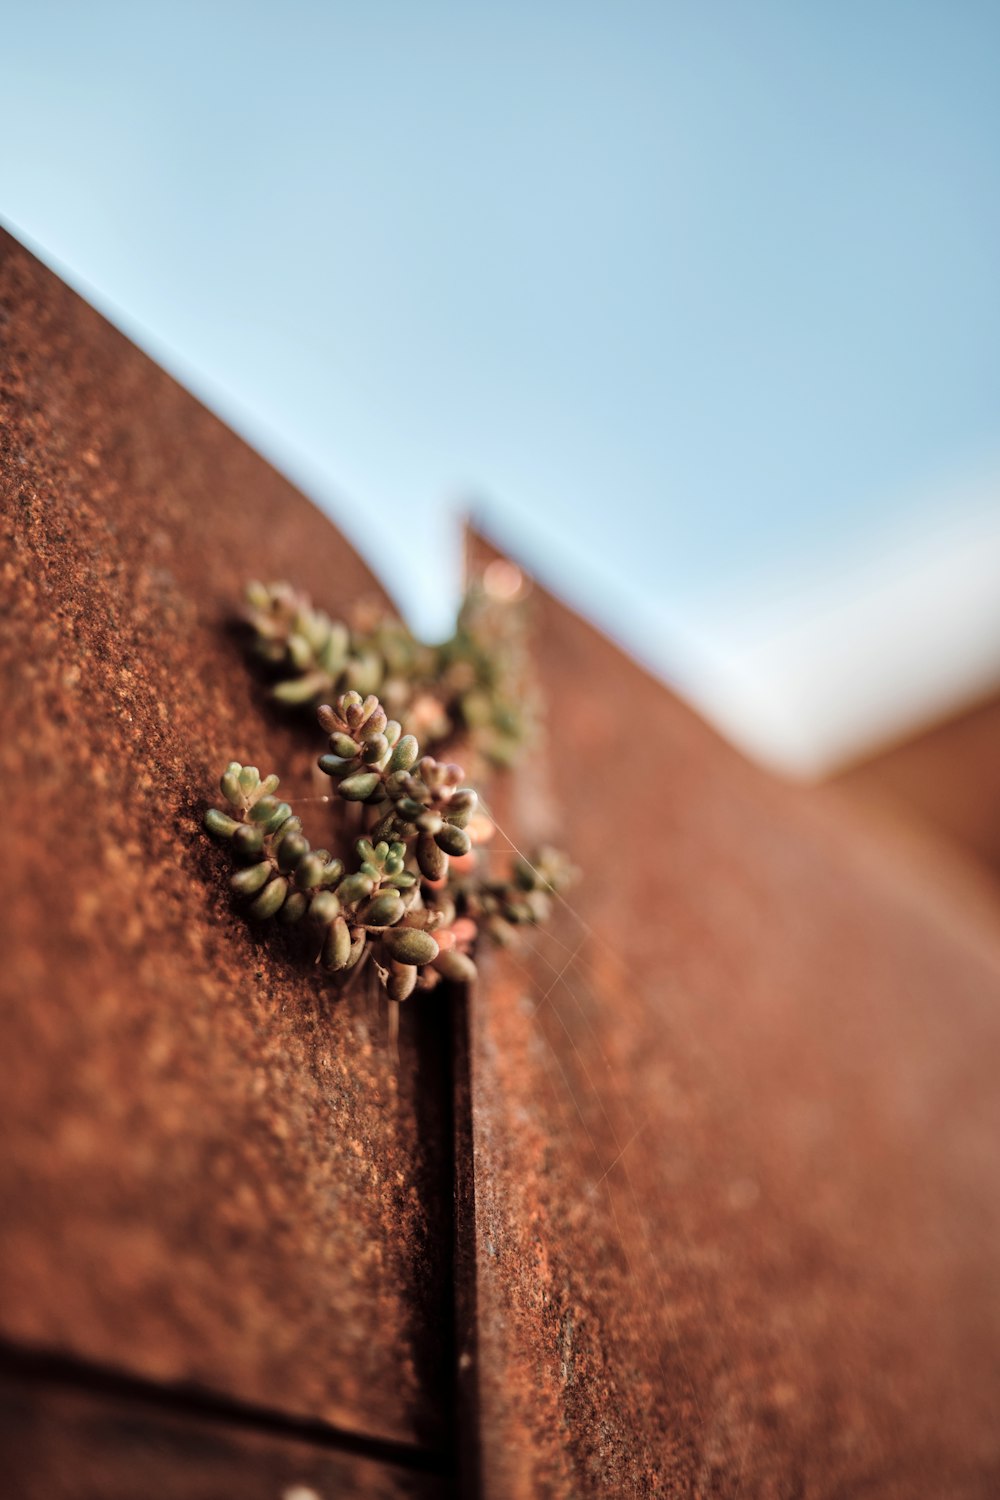 a close up of a plant growing on the side of a building